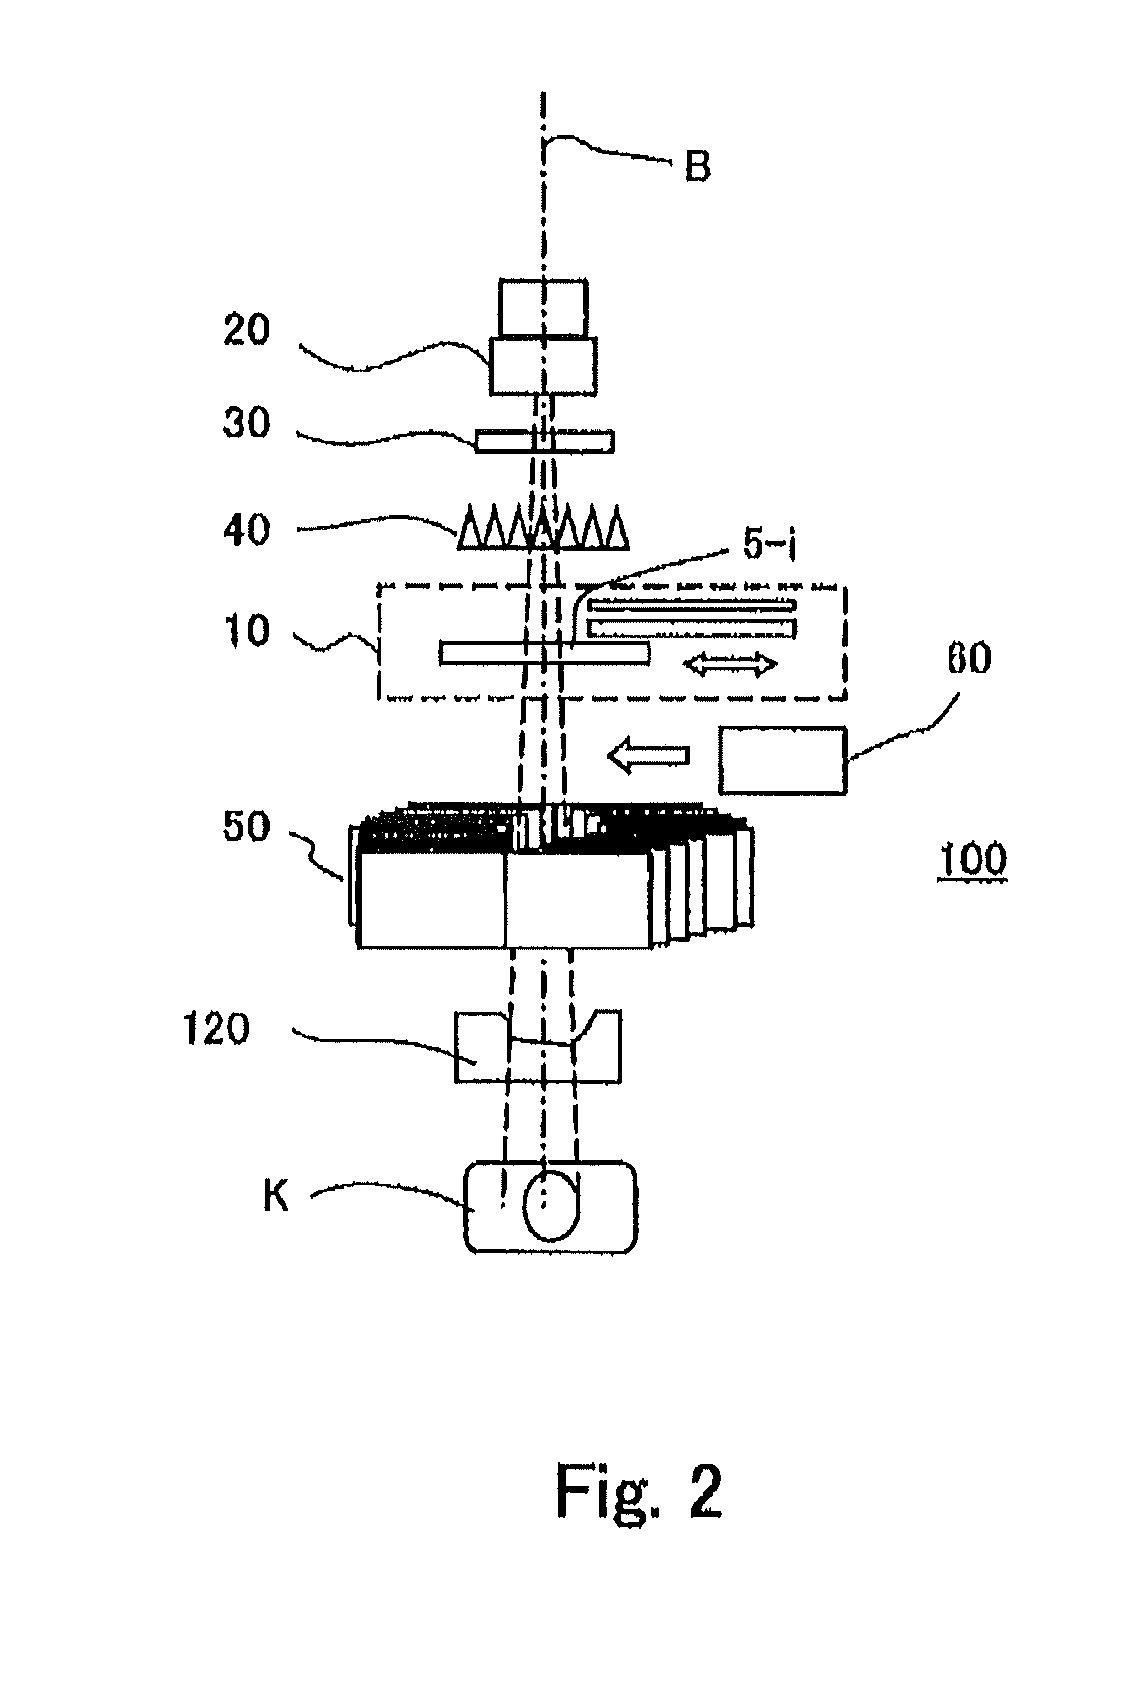 Range shifter and particle radiotherapy device